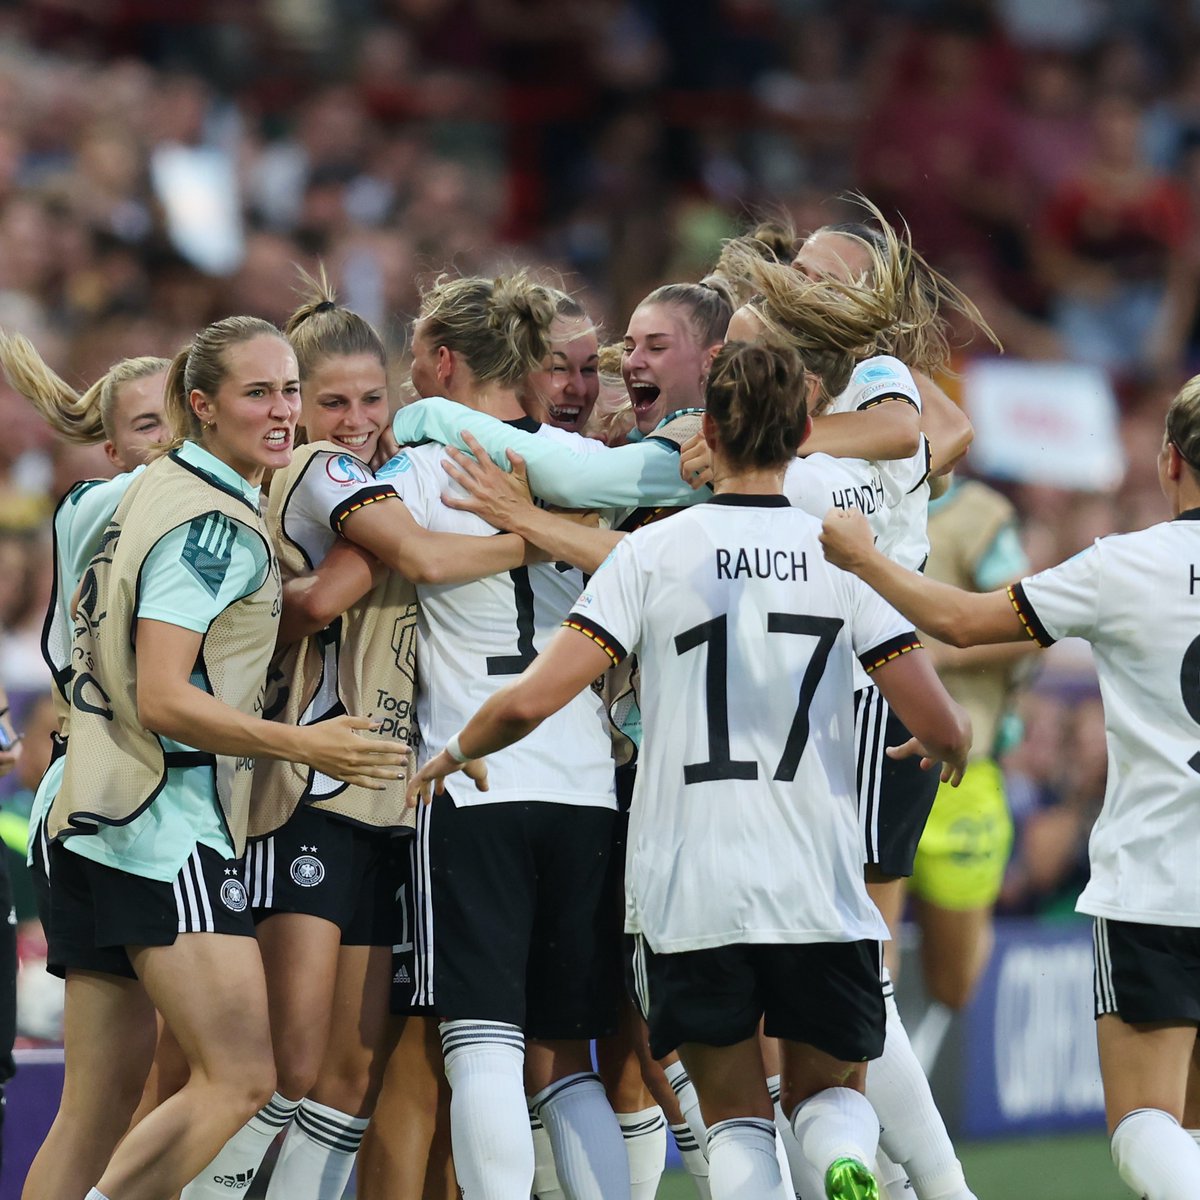 Congratulations @DFB_Frauen who have won their opening two group games of EURO…